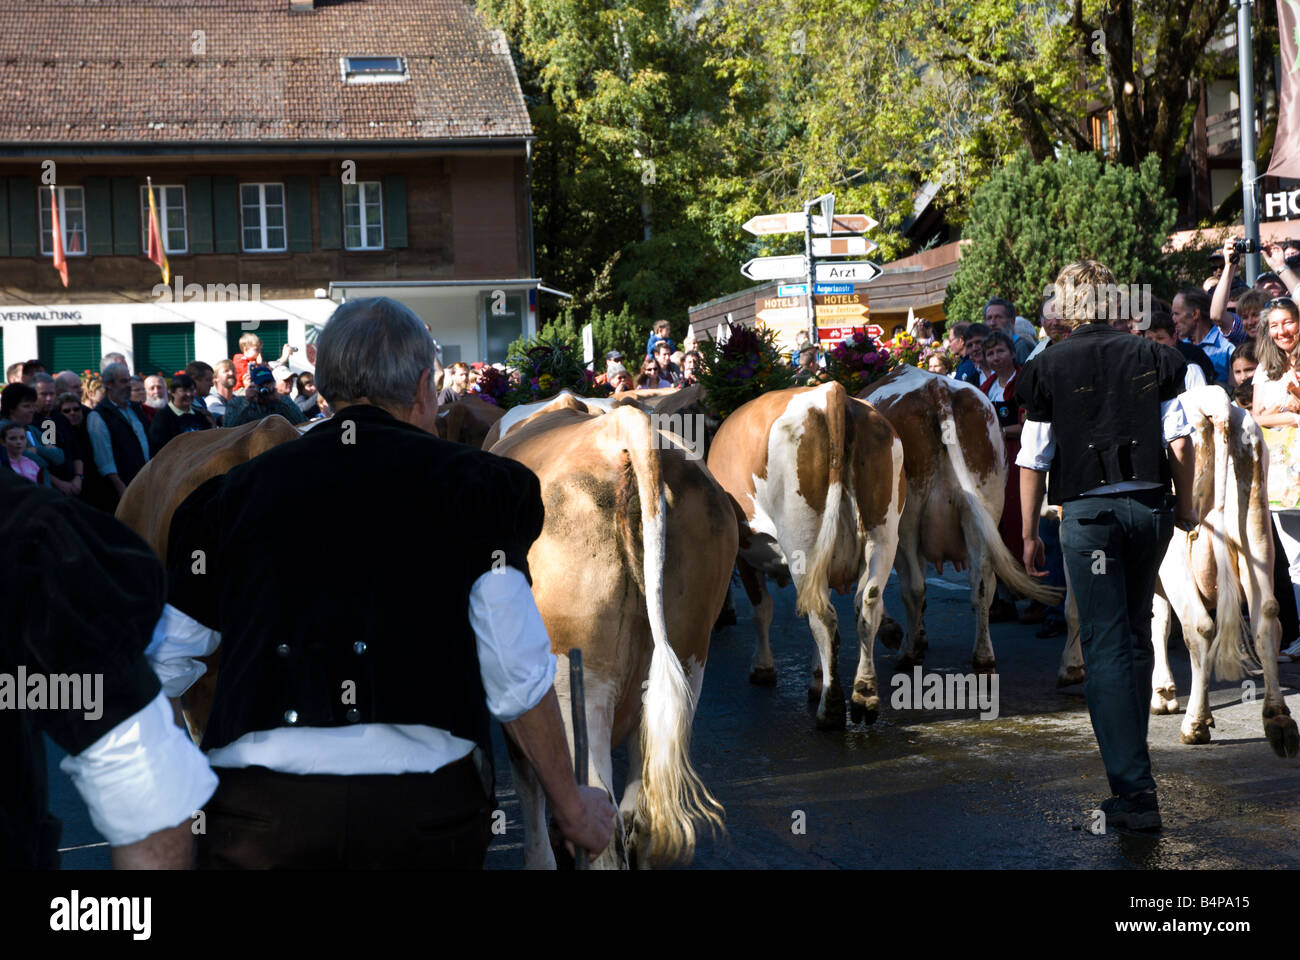 Swiss mountain people dressed in traditional folk costumes follow their cows in the annual Alpenfest parade. Stock Photo